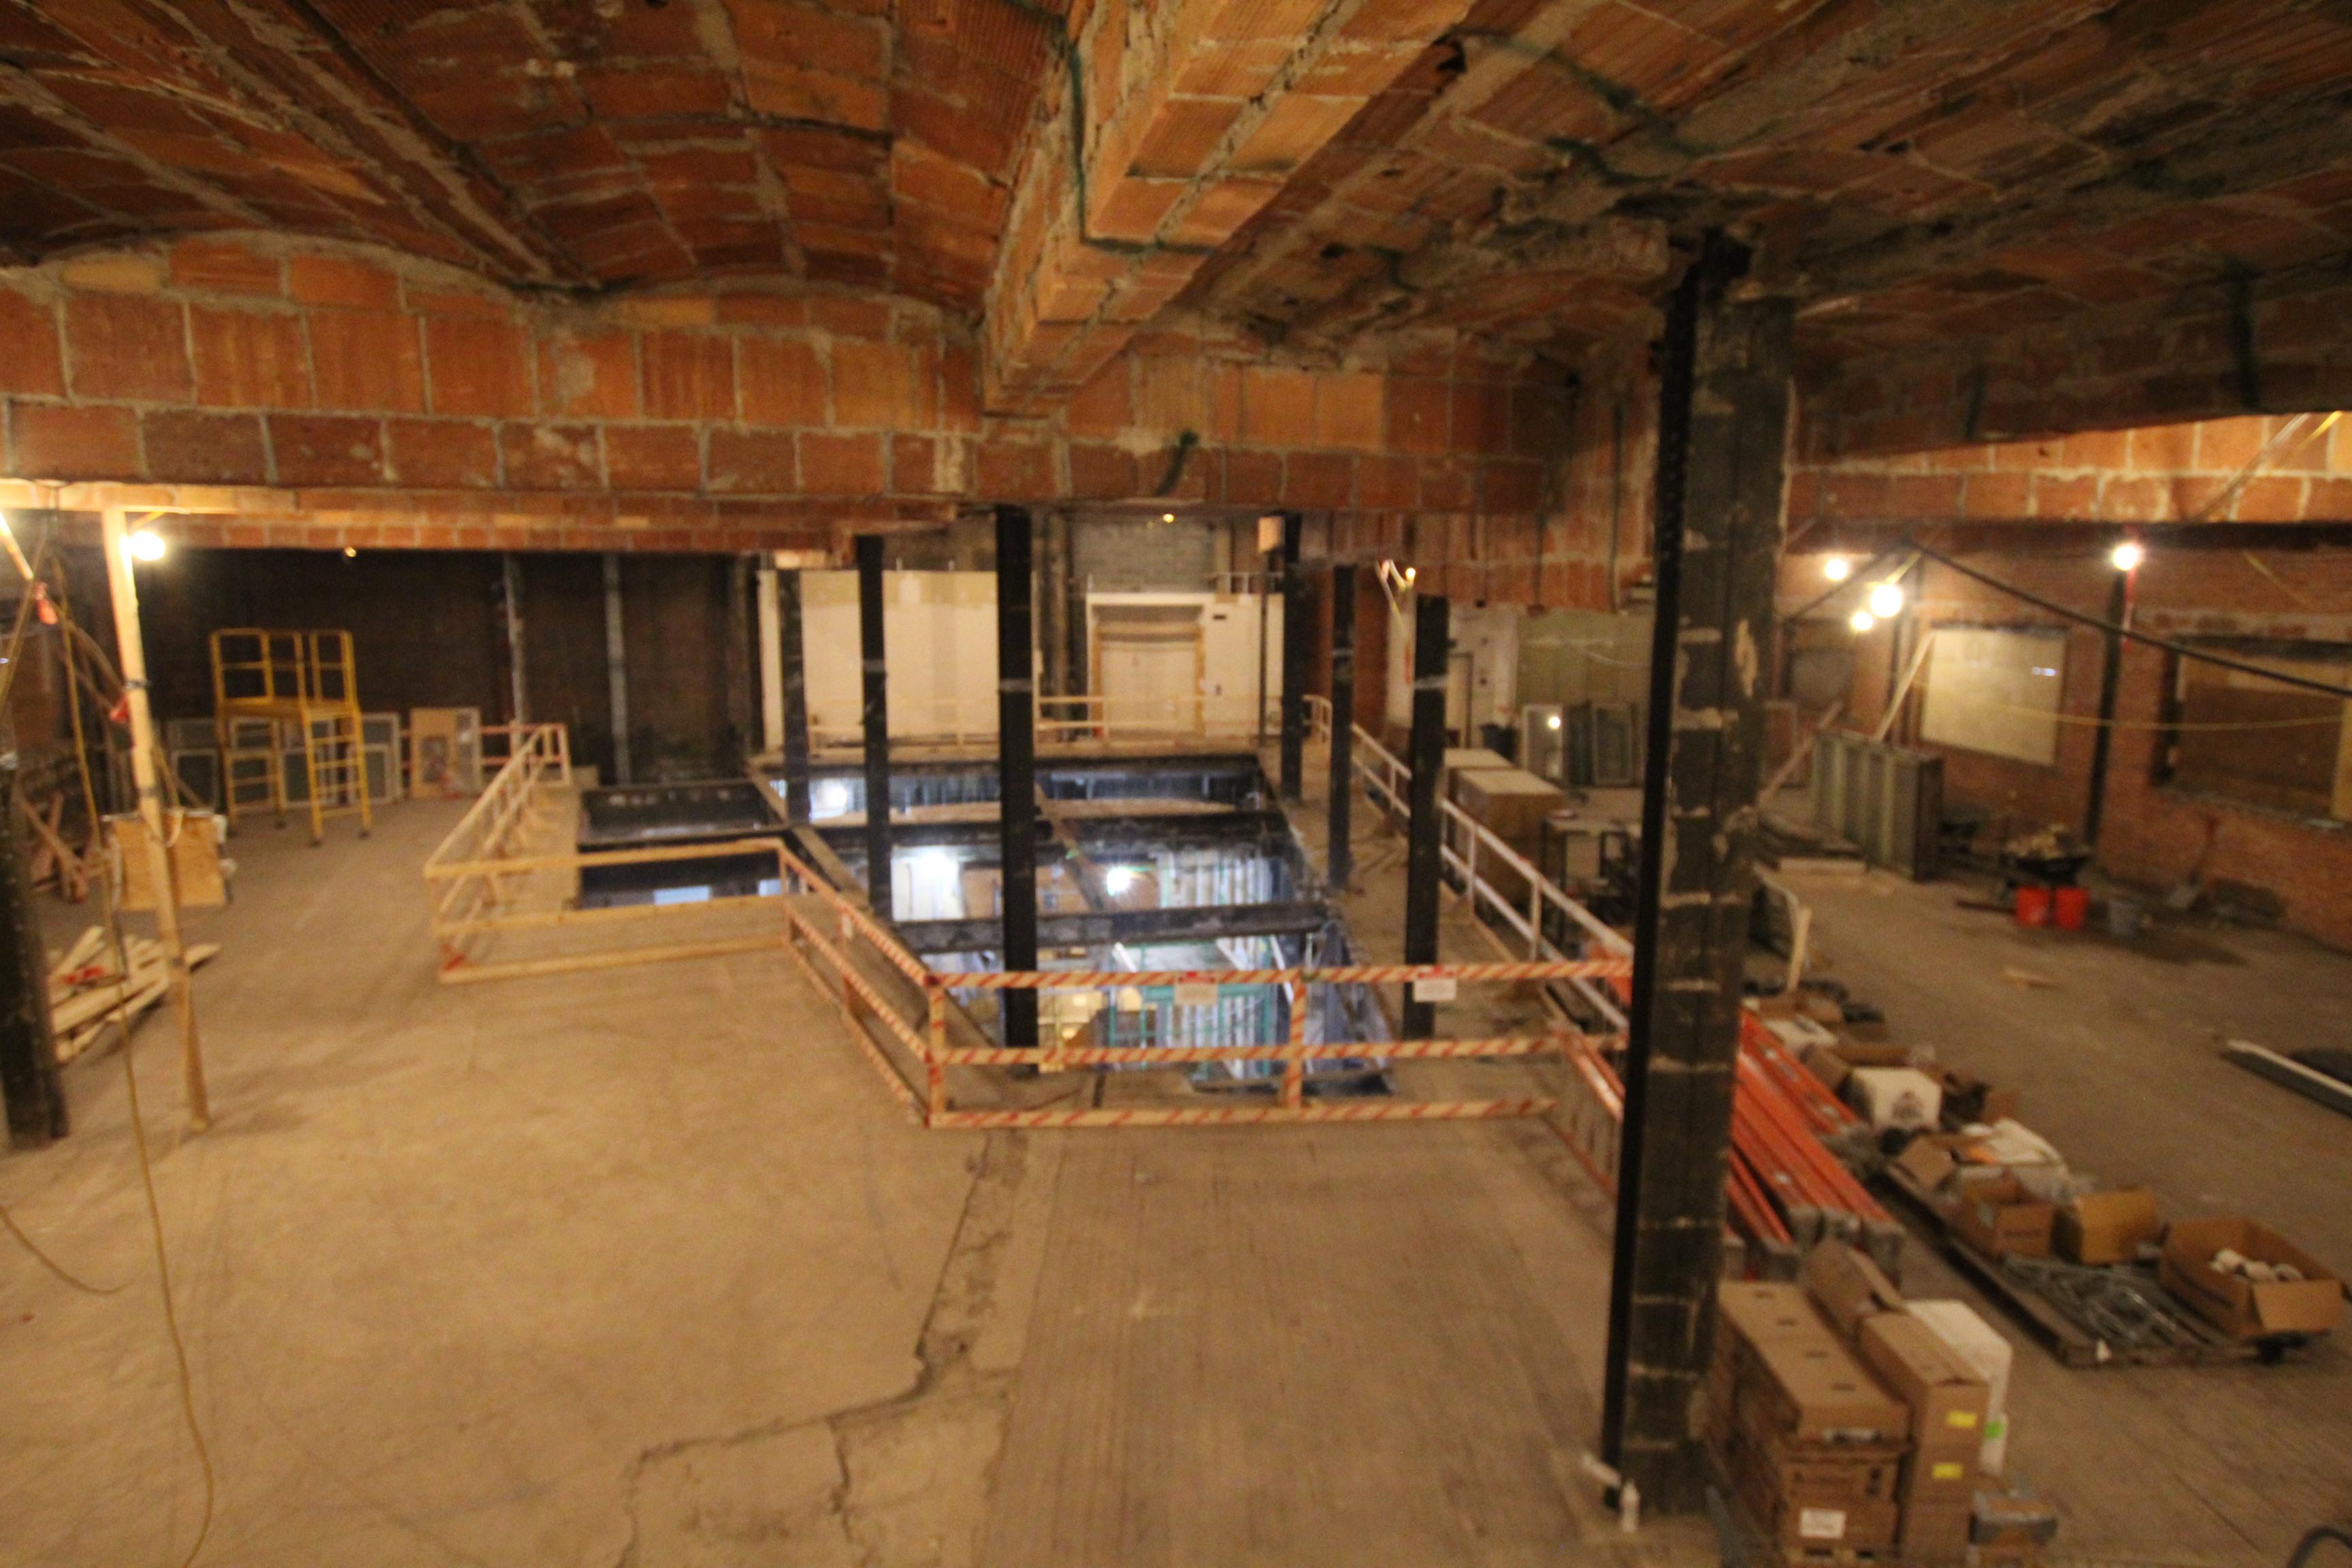 Interior of museum's 4th floor demo with exposed brick, bare floors, metal supports, a large reinforced hole in the middle of the floor.